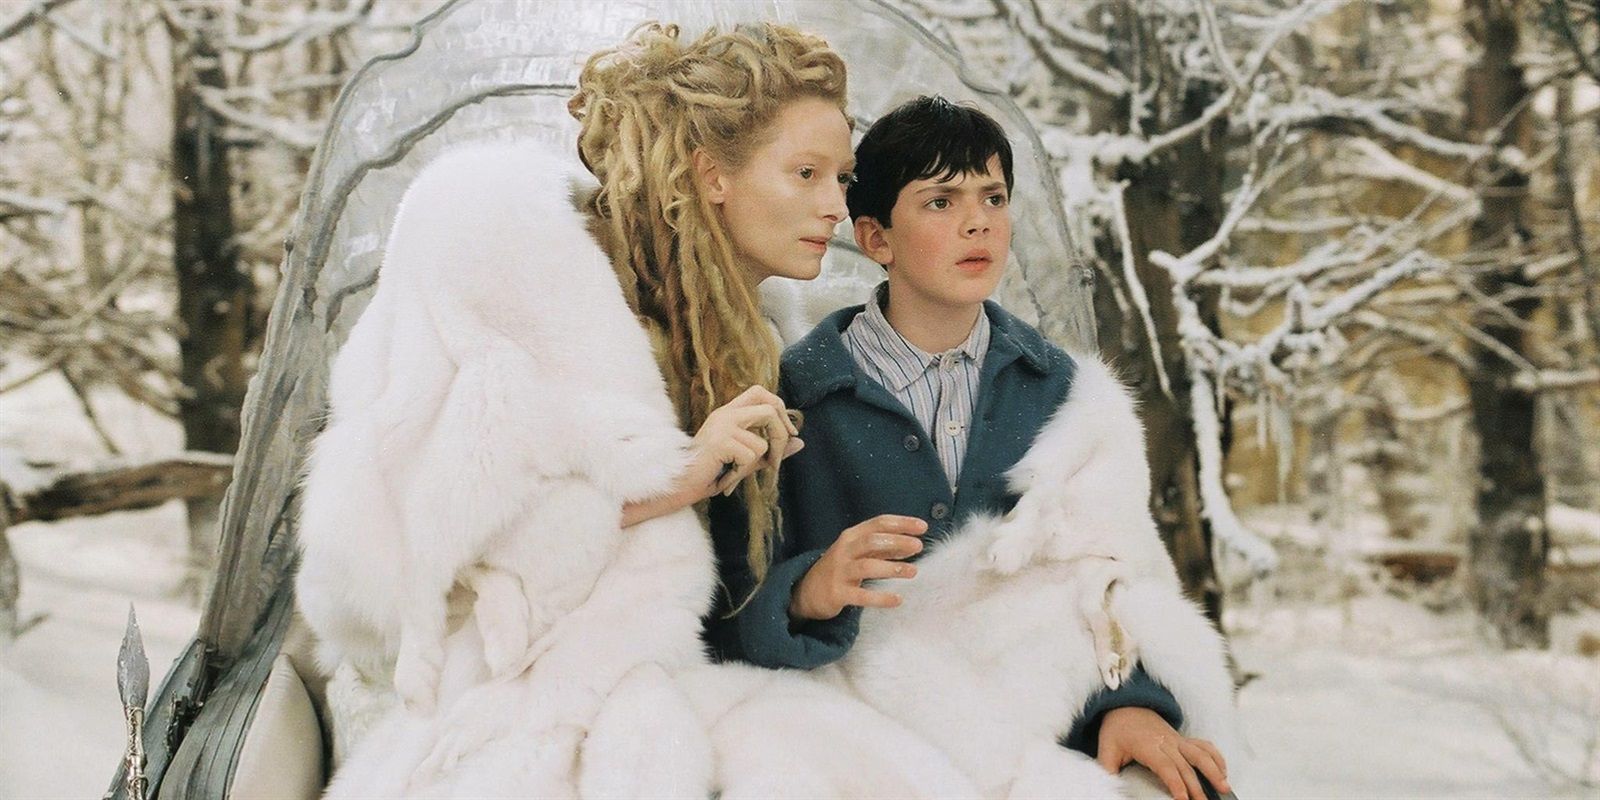 Tilda Swinton as the White Witch and Skandar Keynes as Edmund in The Lion The Witch and the Wardrobe